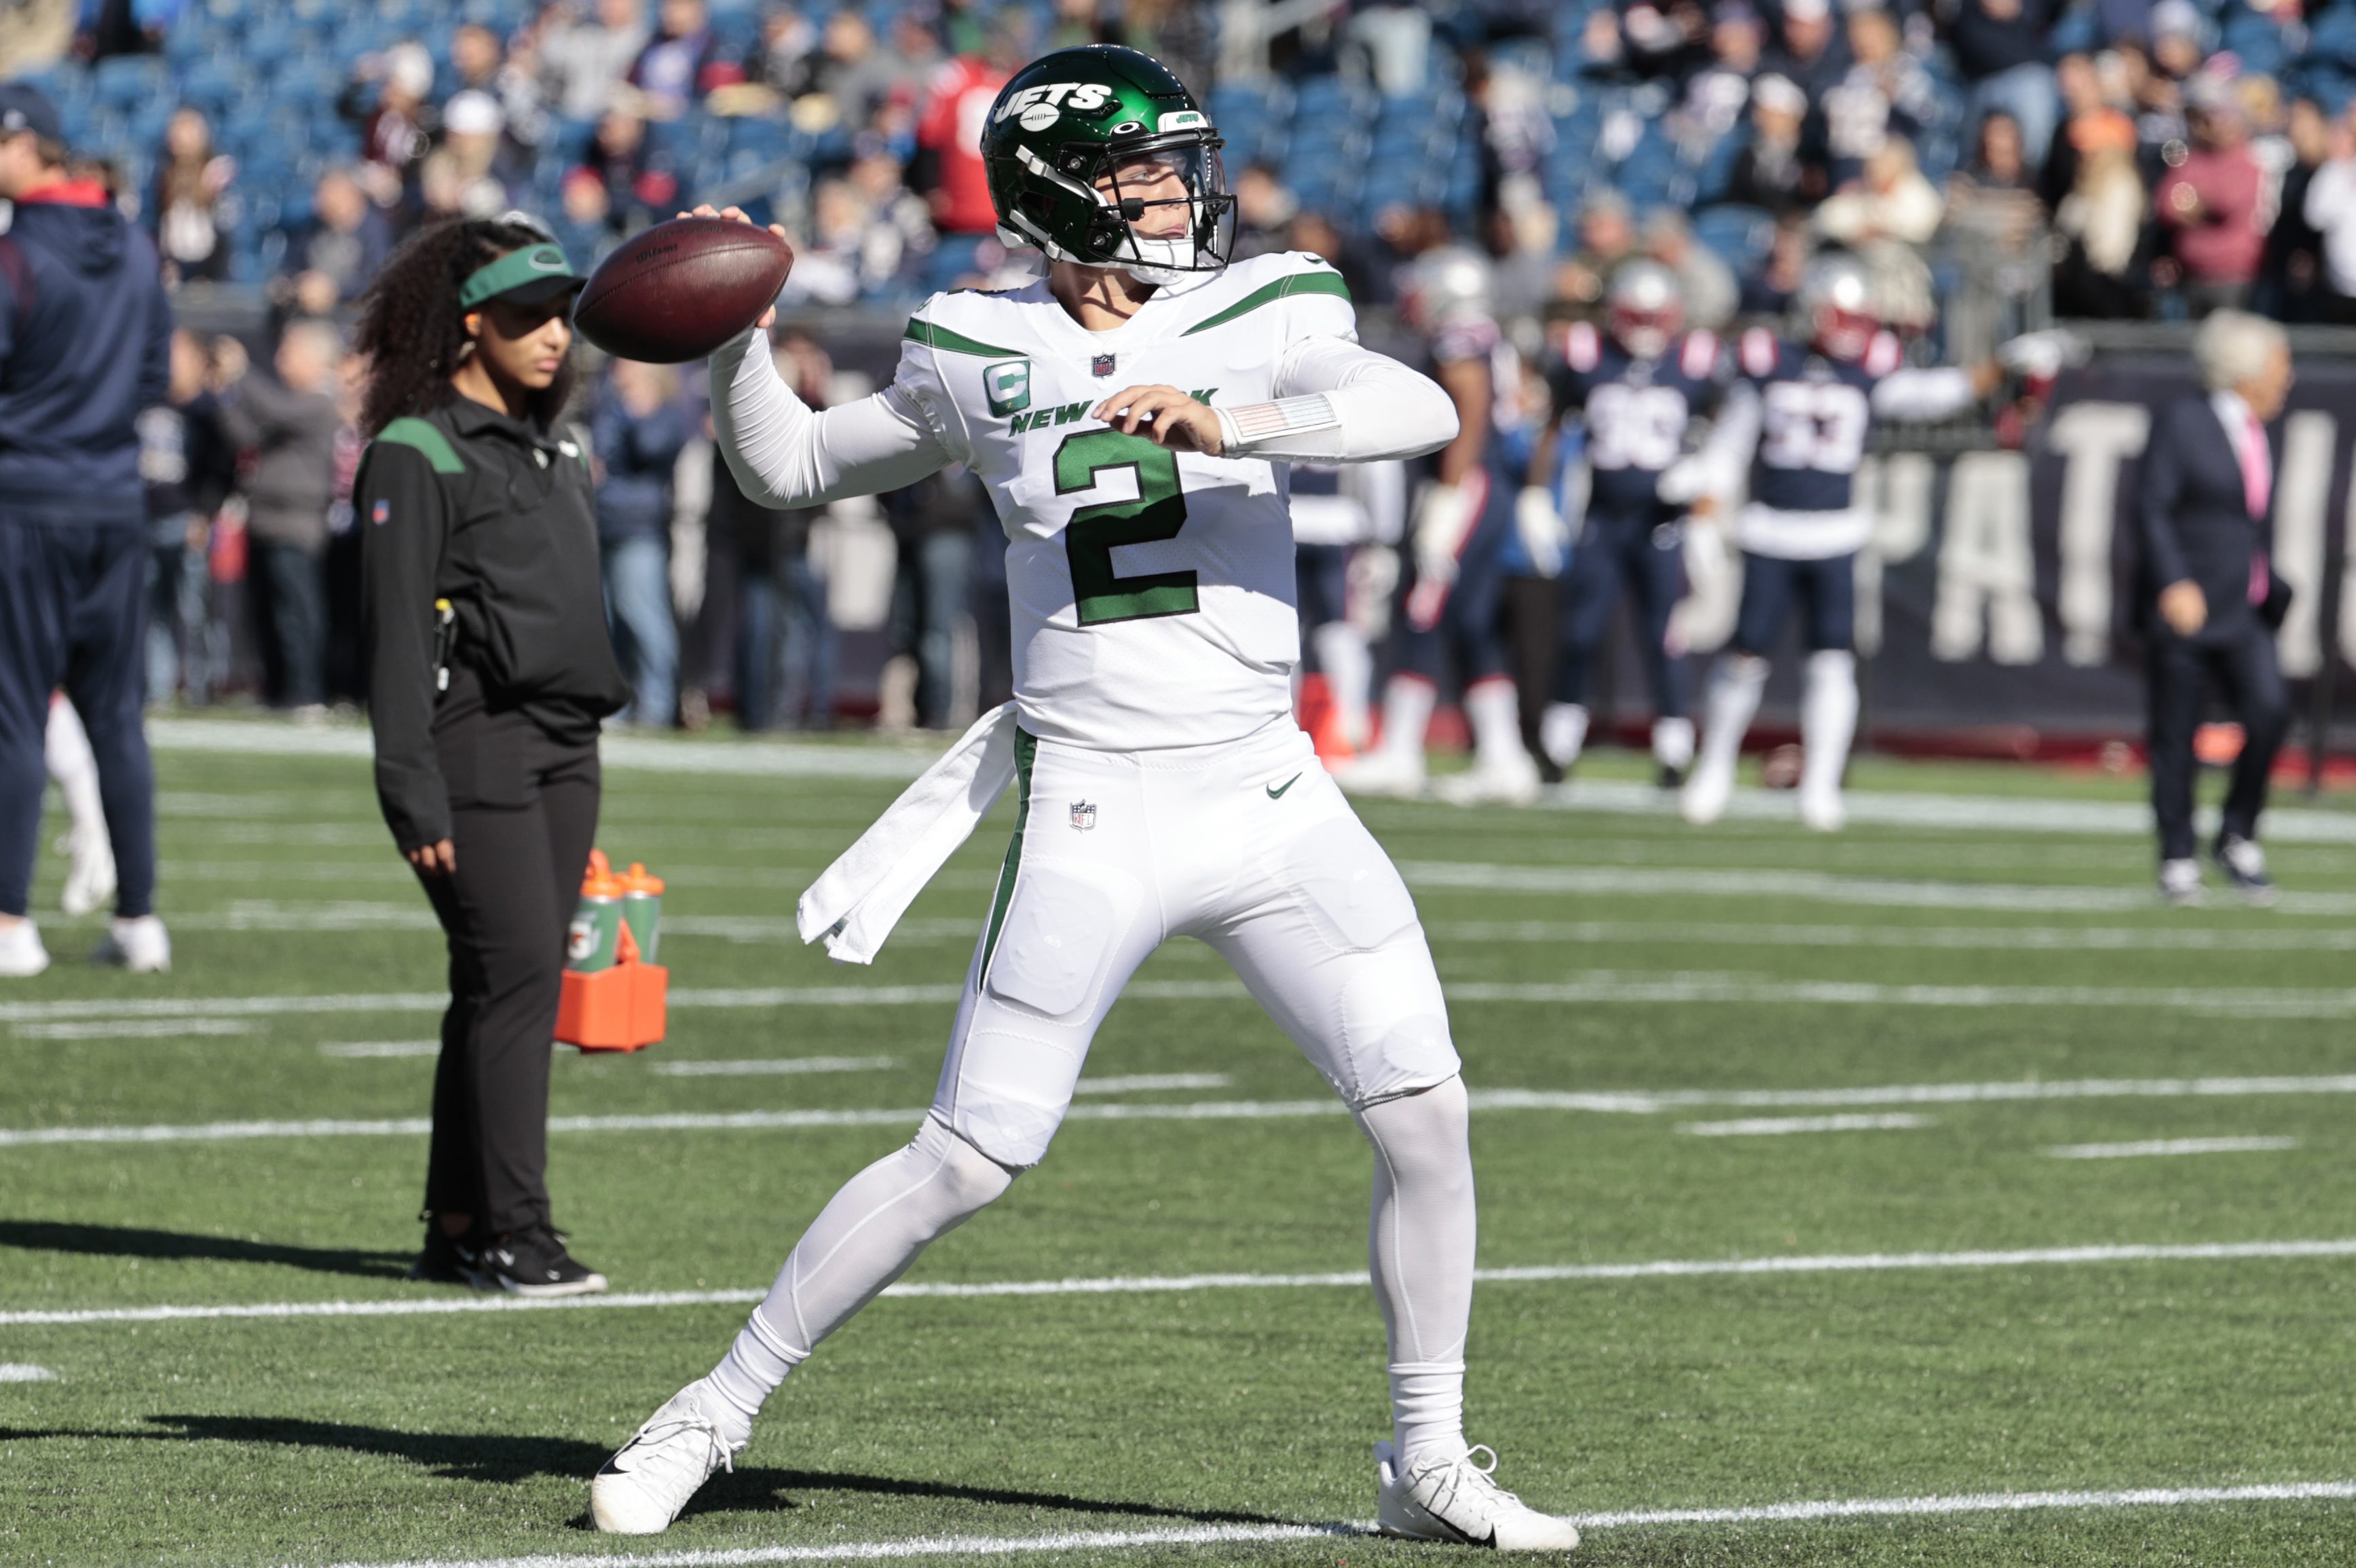 New York Jets Quarterback to Be Benched in Week 12 - InsideHook